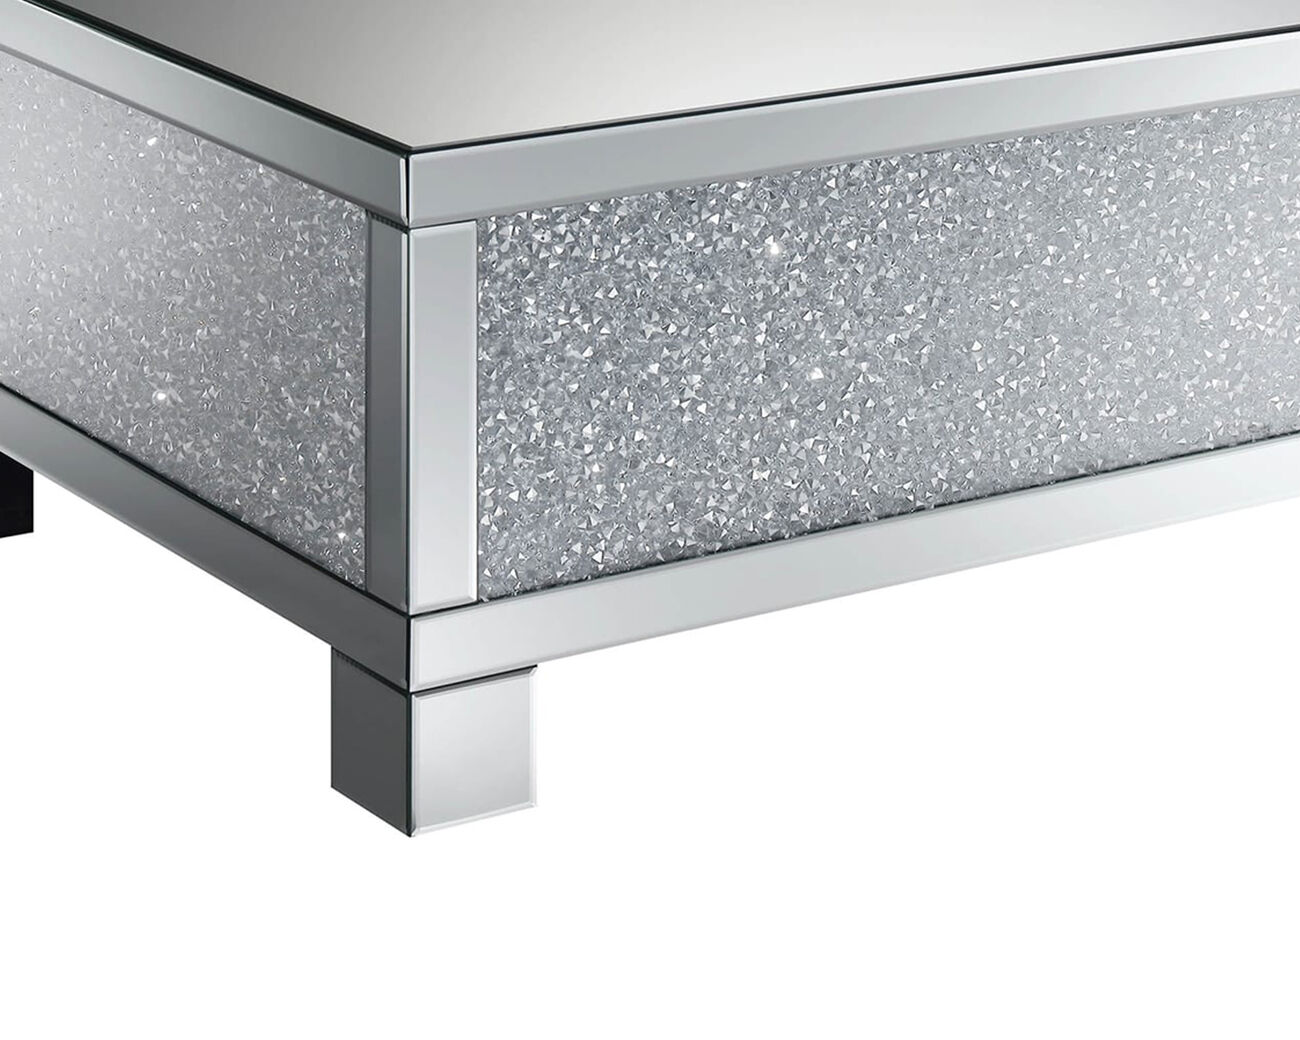 Contemporary Style Metal Coffee Table with Crystal Accents, Silver